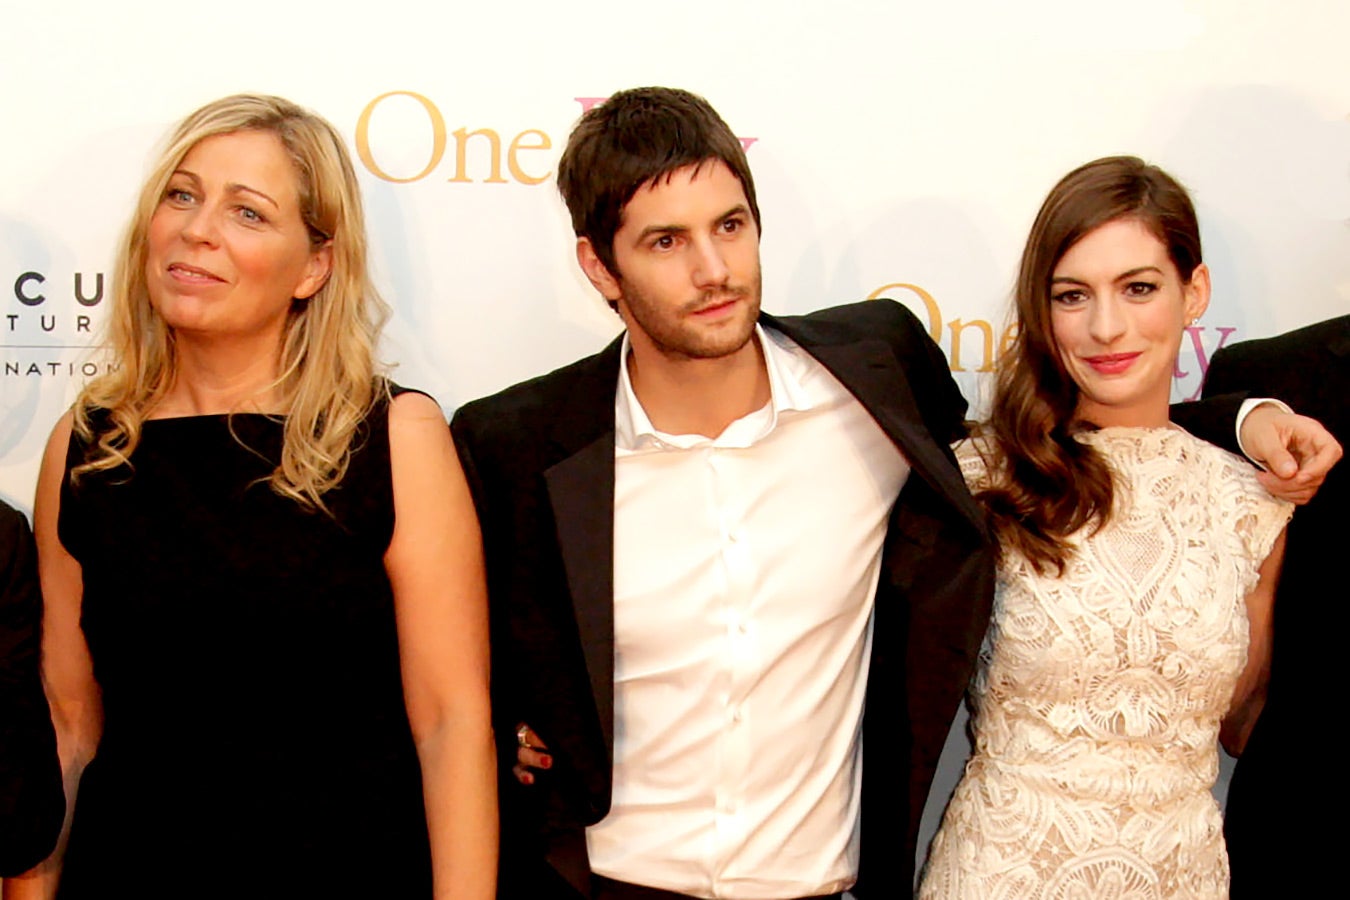 Lone Scherfig, Jim Sturgess, and Anne Hathaway on the red carpet.